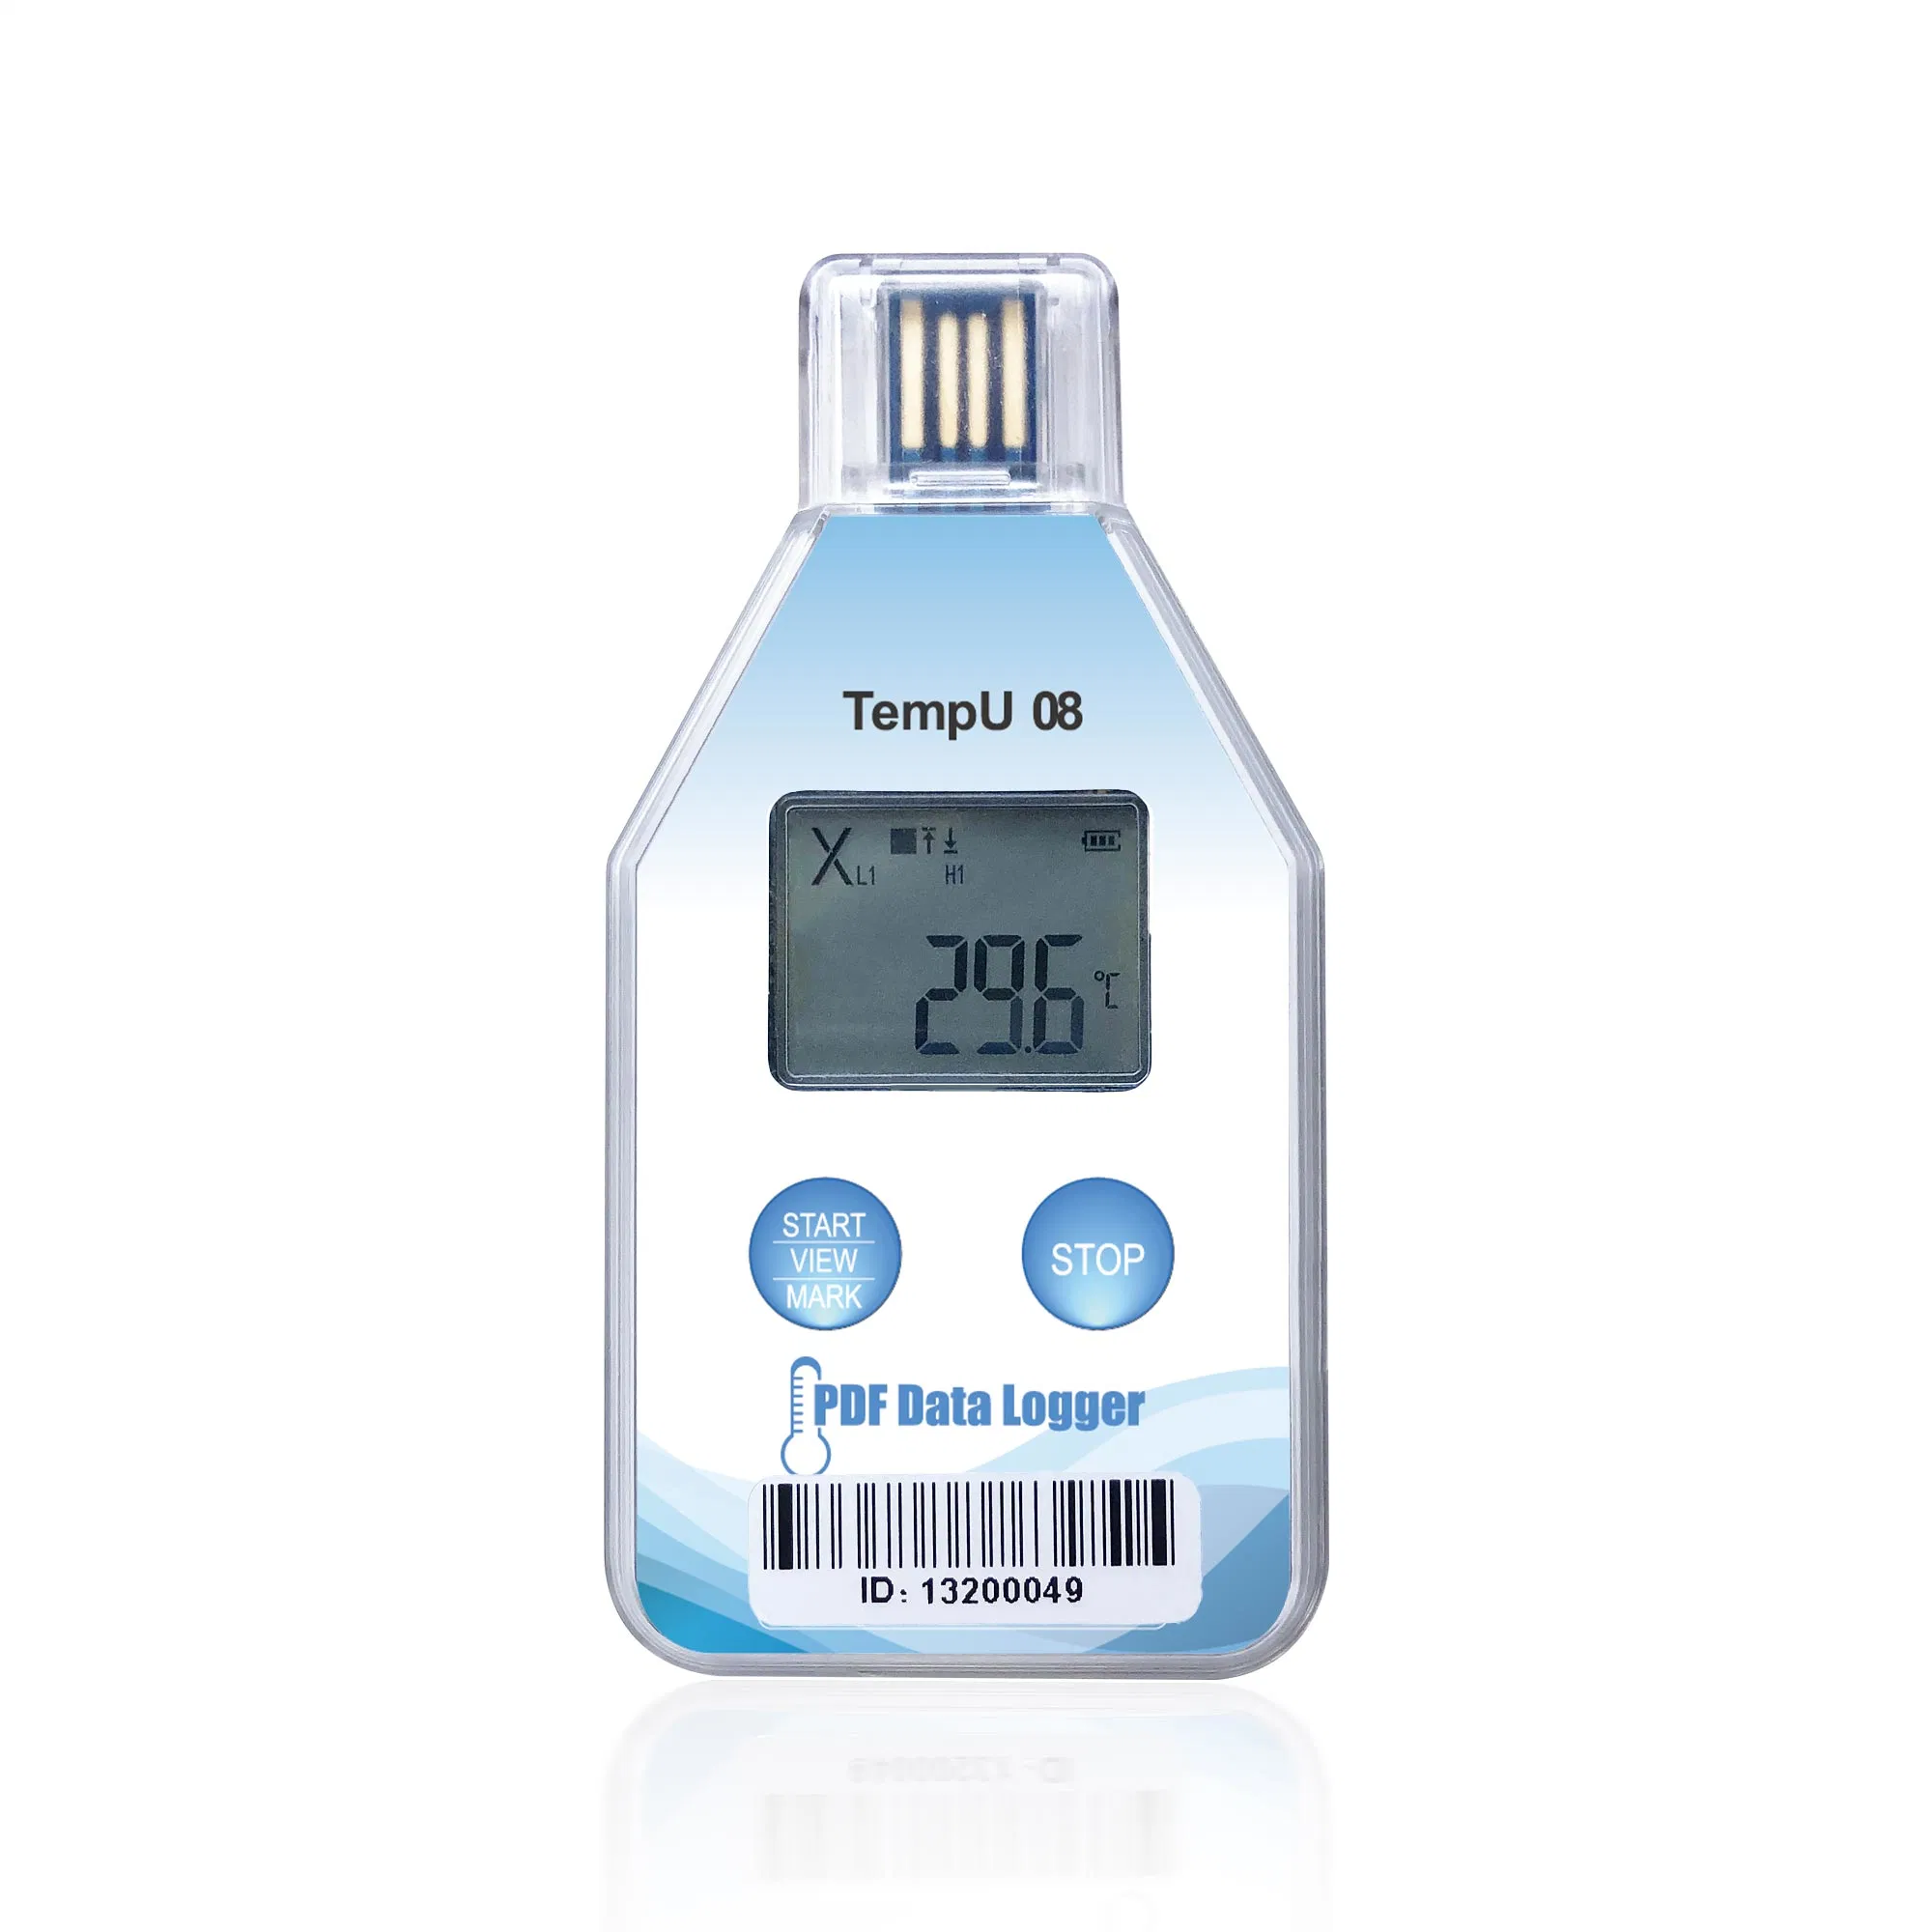 Single-Use USB Temperature Data Logger with LCD Display Designed Specifically for Monitoring Refrigerated Vaccine Temperature Storage